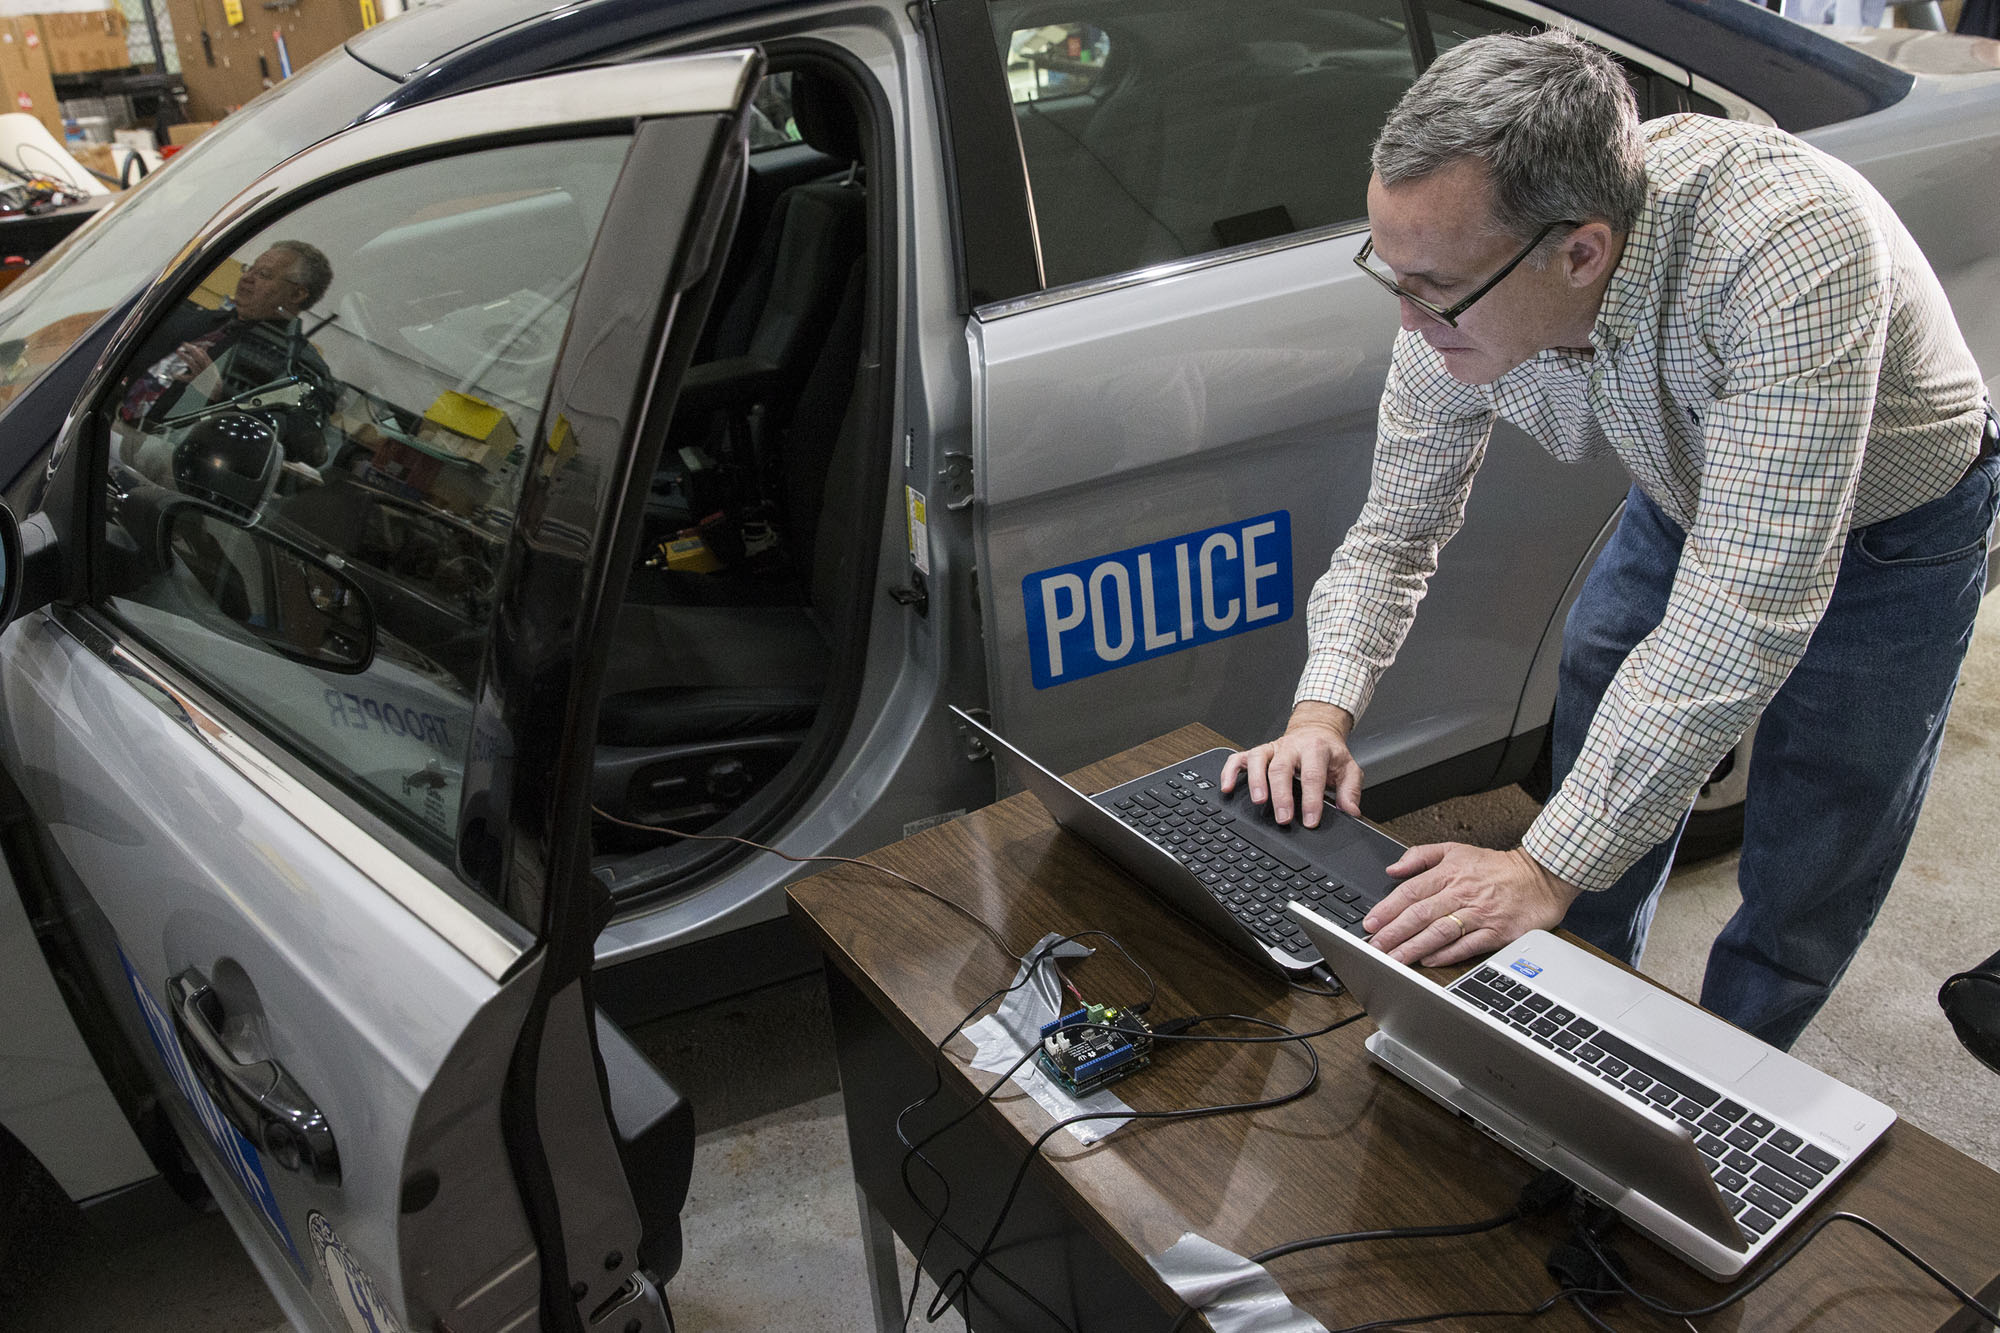 Gary Huband connects two laptops to a Virginia State Police Cruiser